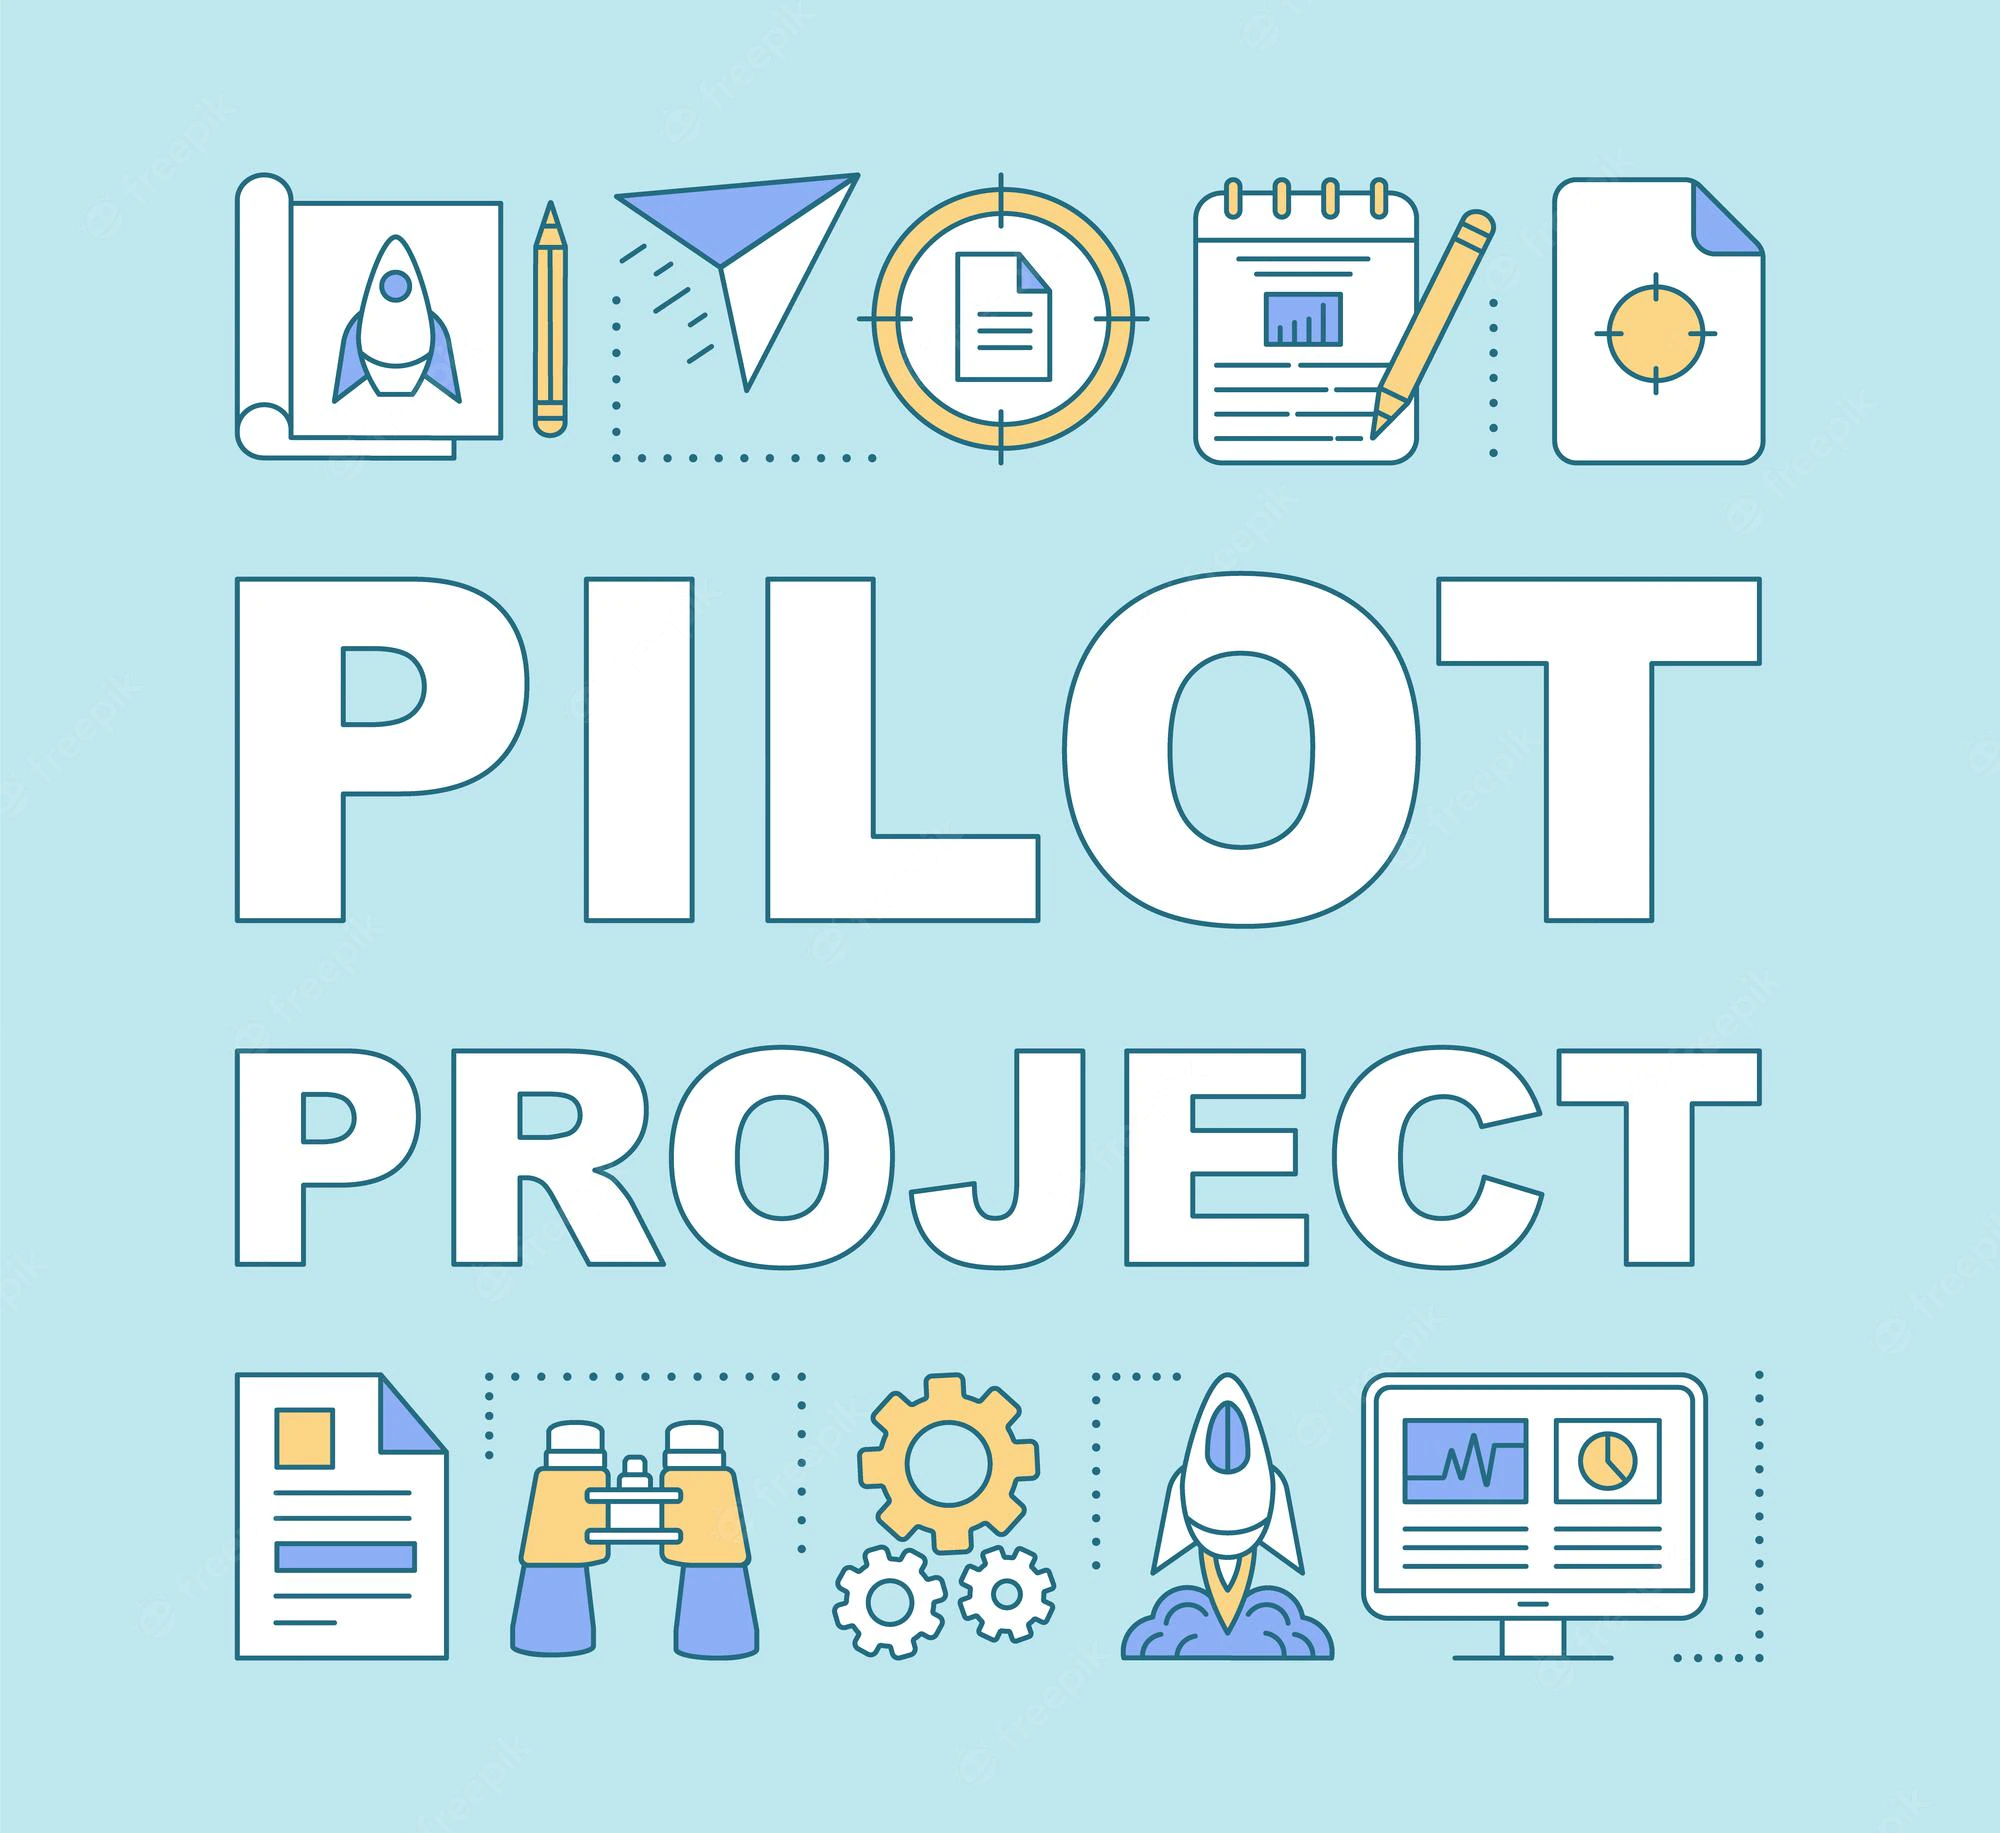 pilot-project-word-concepts-banner-mvp-launch-business-start-prototype-release-presentation-website-isolated-lettering-typography-idea-with-linear-icons-vector-outline-illustration_106317-10963